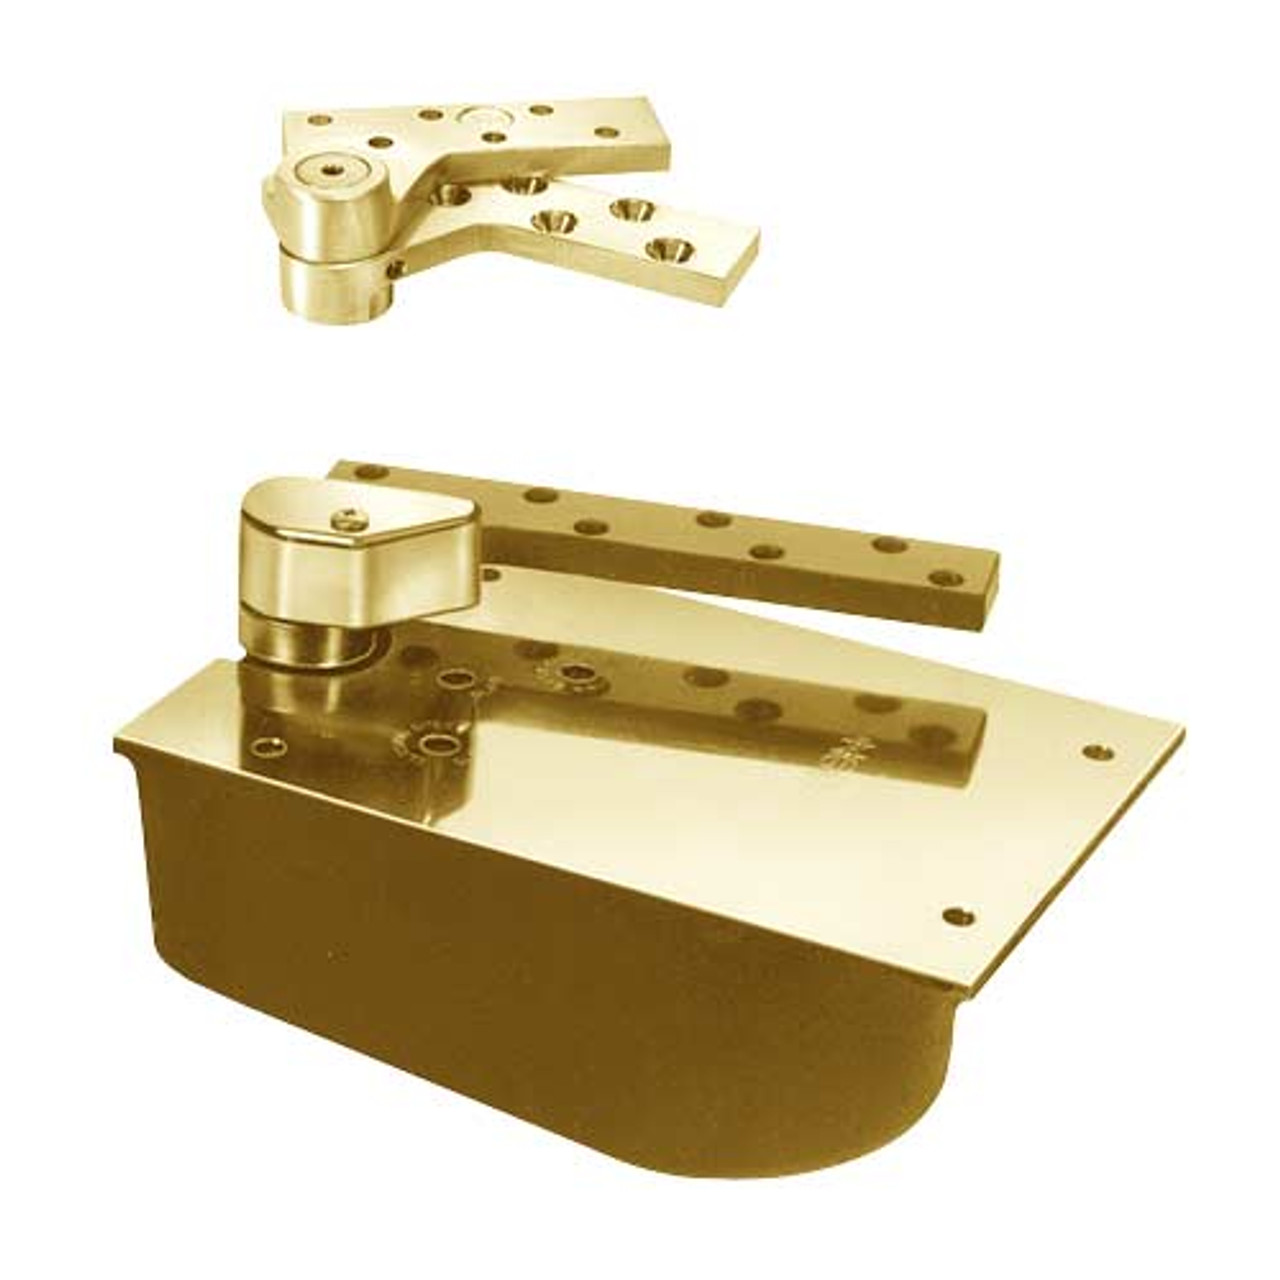 L27-90S-LFP-LH-1-3/4-605 Rixson 27 Series Extra Heavy Duty Lead Lined Offset Floor Closer in Bright Brass Finish